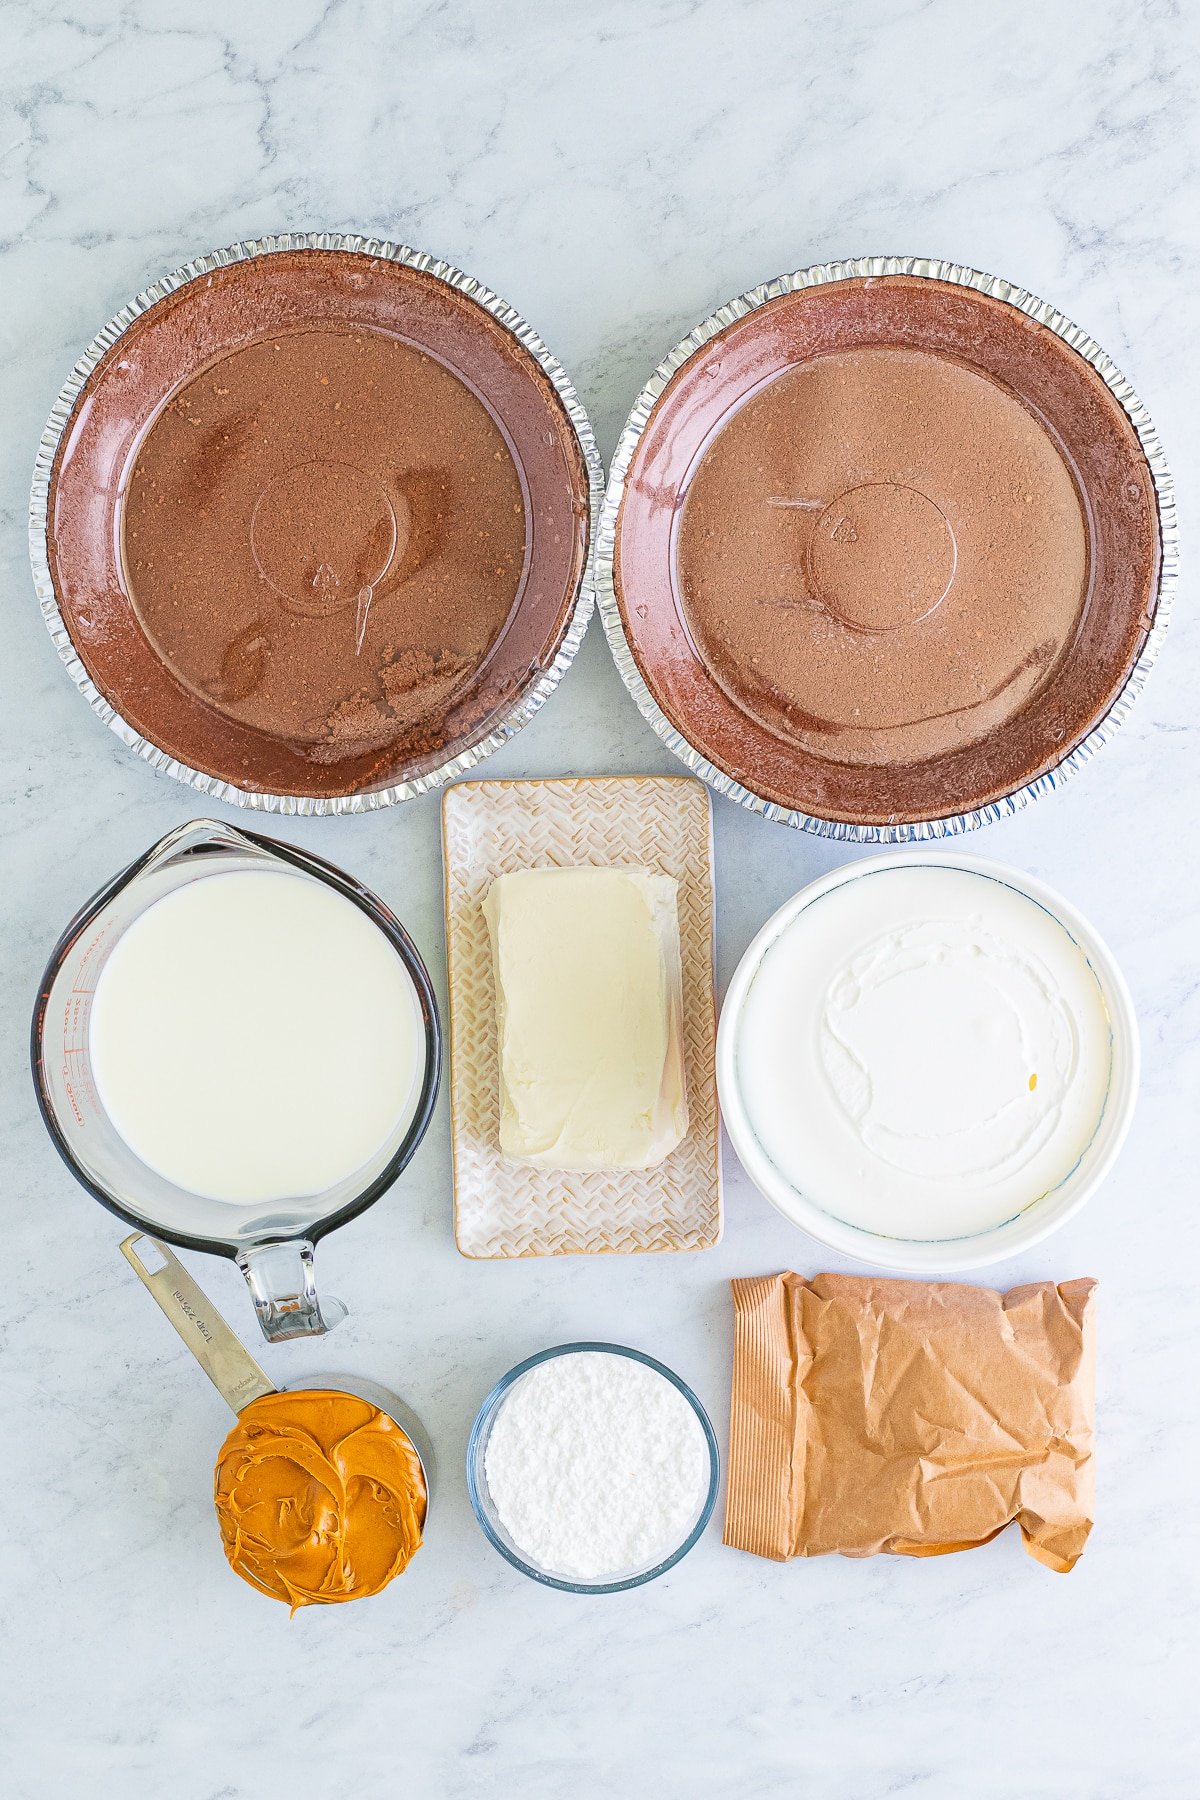 ingredients needed to make chocolate instant pudding pie